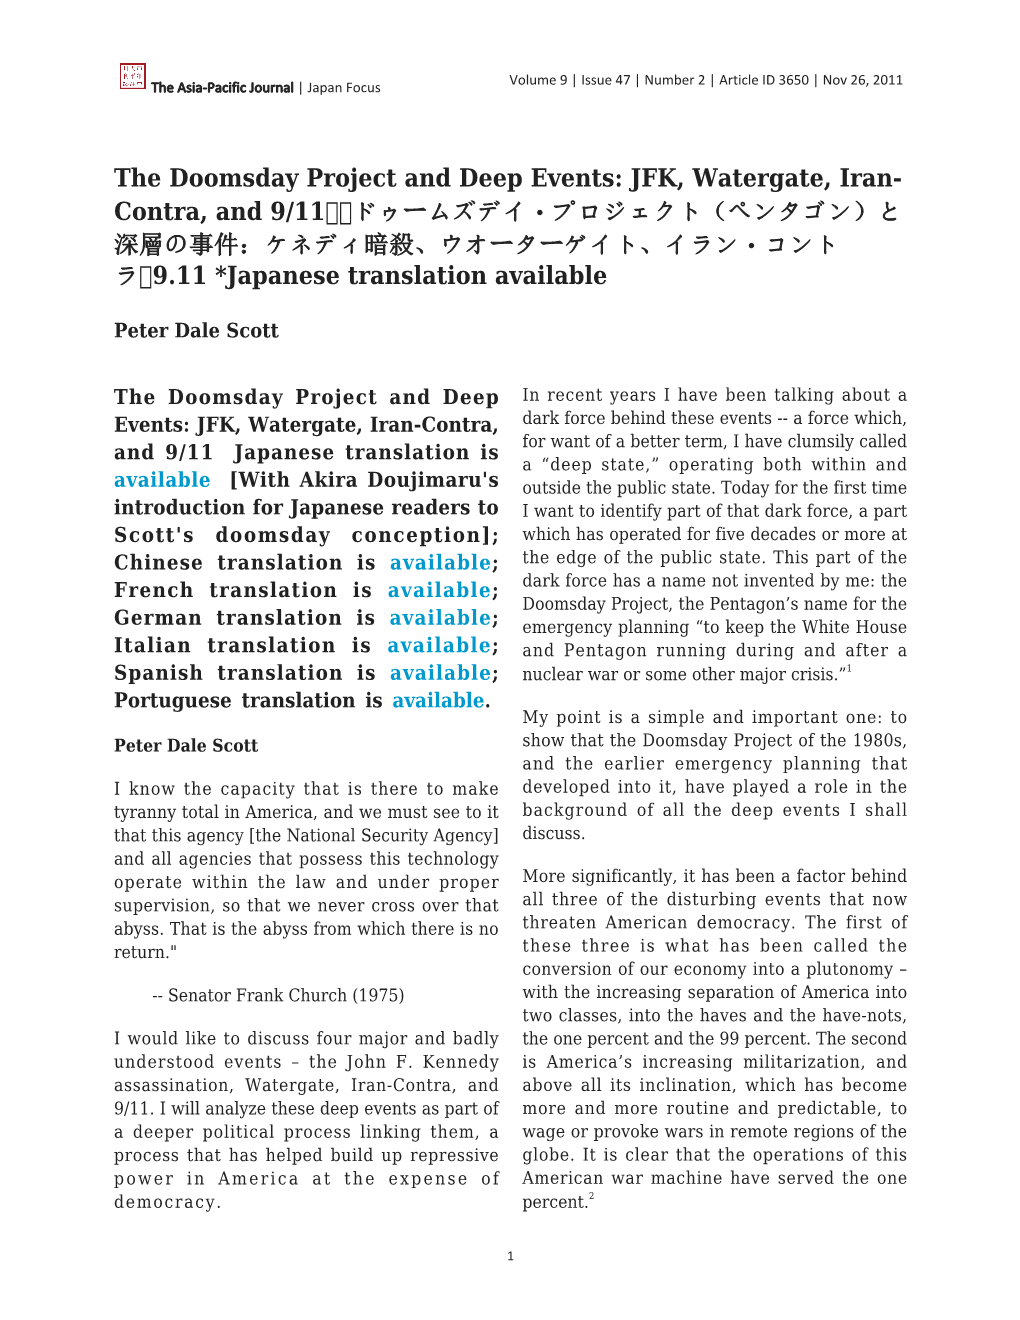 The Doomsday Project and Deep Events: JFK